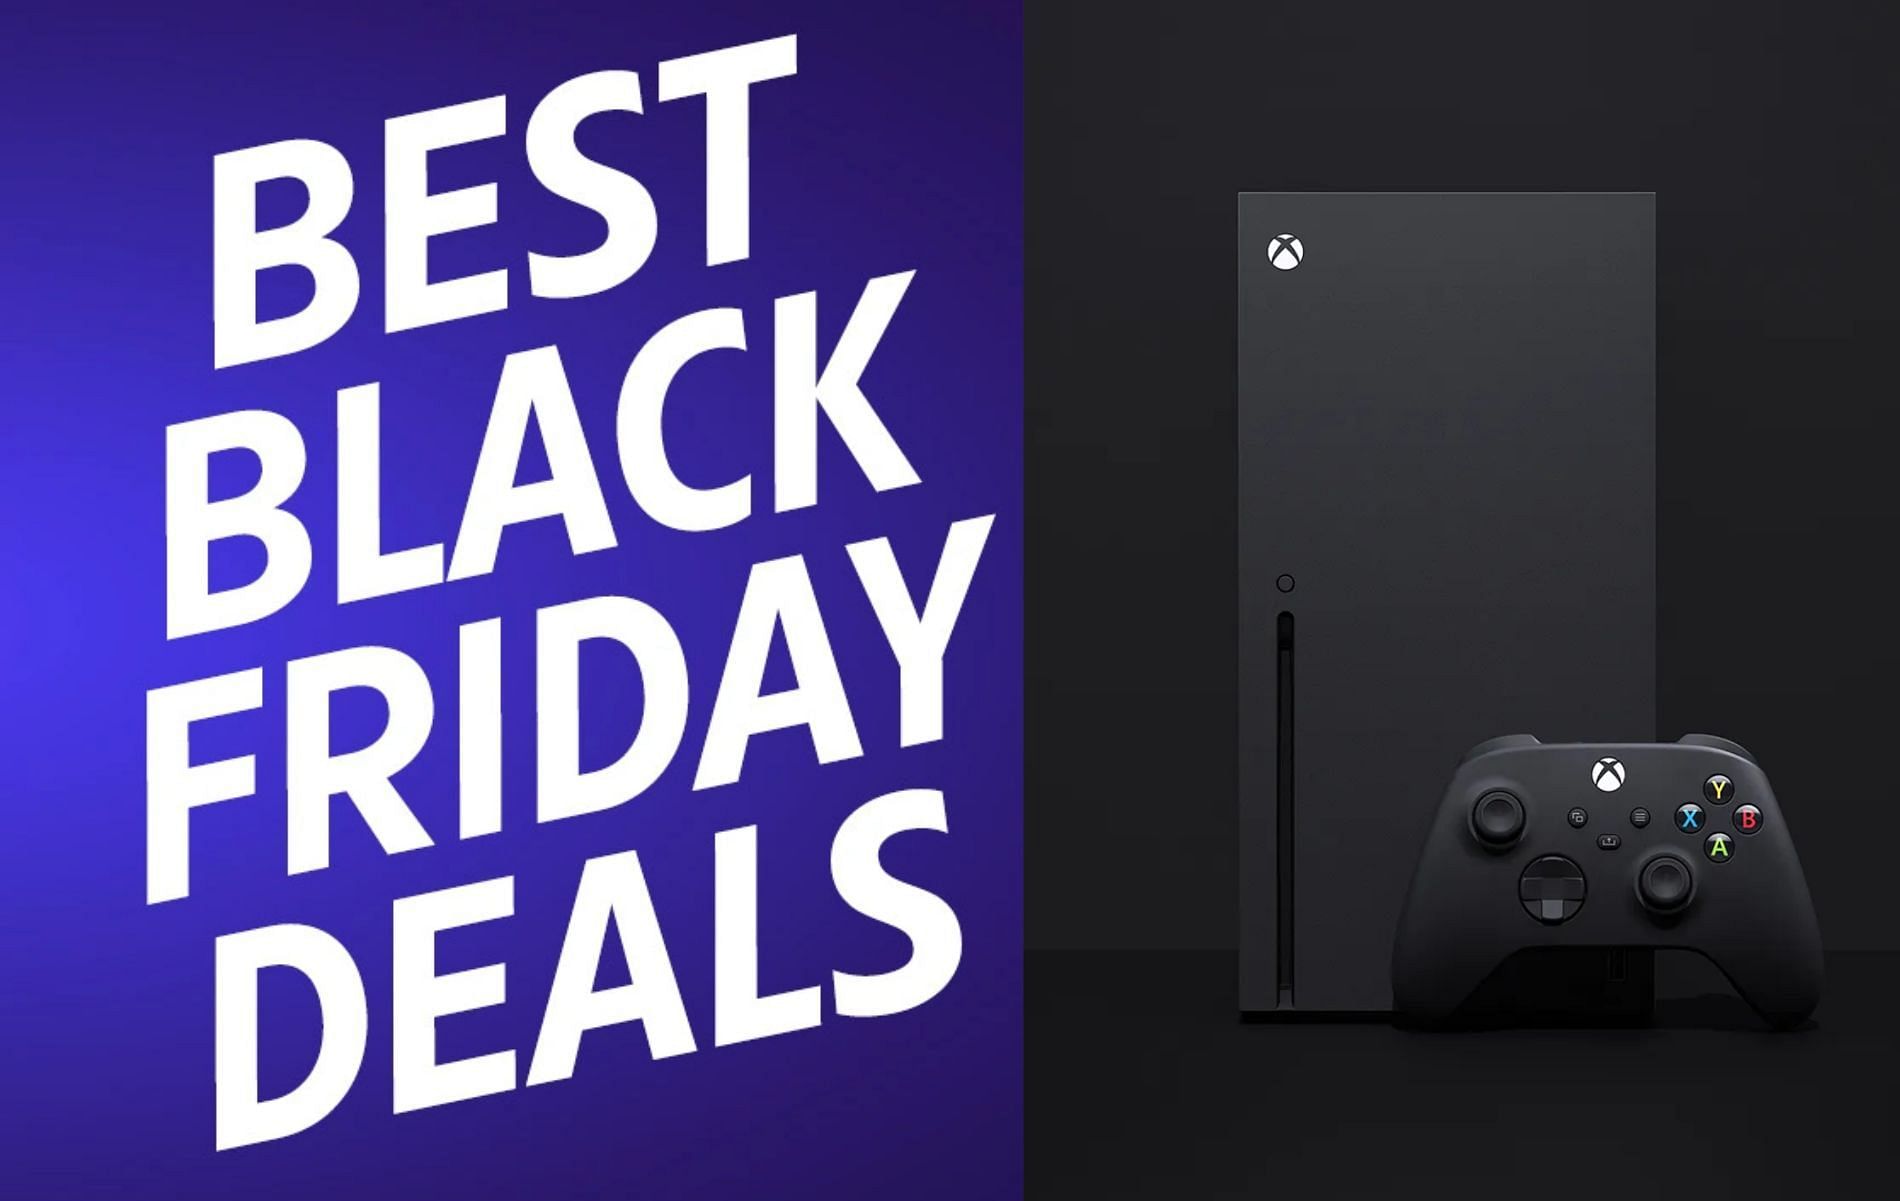 Black Friday Xbox Series X Deals, Xbox Series X Accessories and Games - News